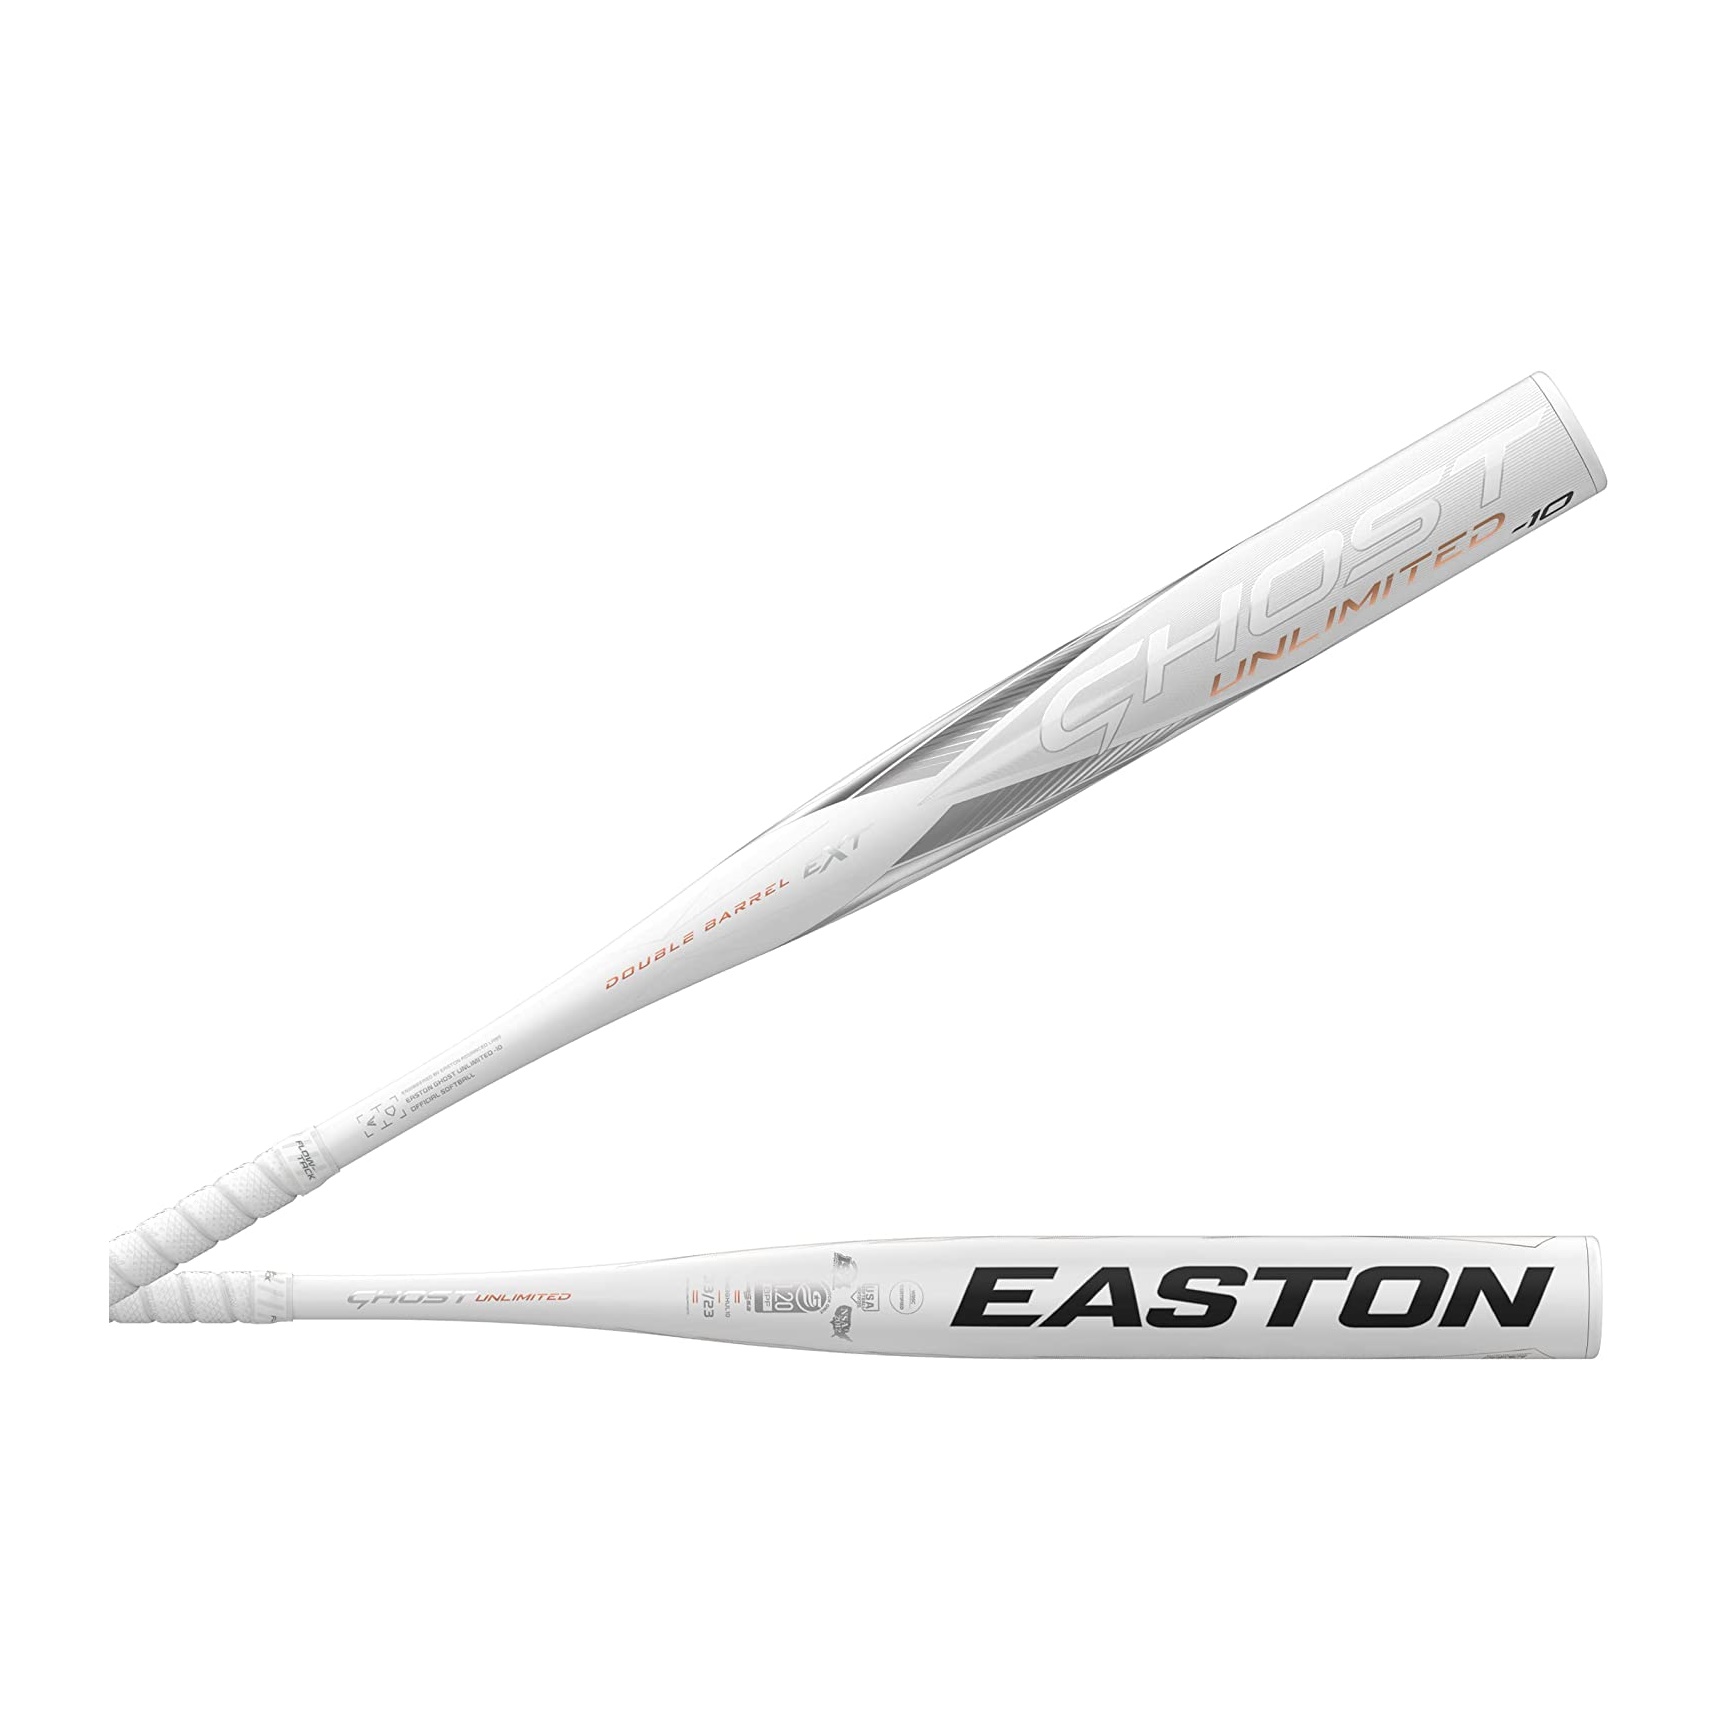 easton-ghost-unlimited-fp23ghul-11-fastpitch-softball-bat-29-inch-18-oz FP23GHUL11-2918 Easton 628412416075 Introducing the Easton Ghost Unlimited Fastpitch Softball Bat a true game-changer